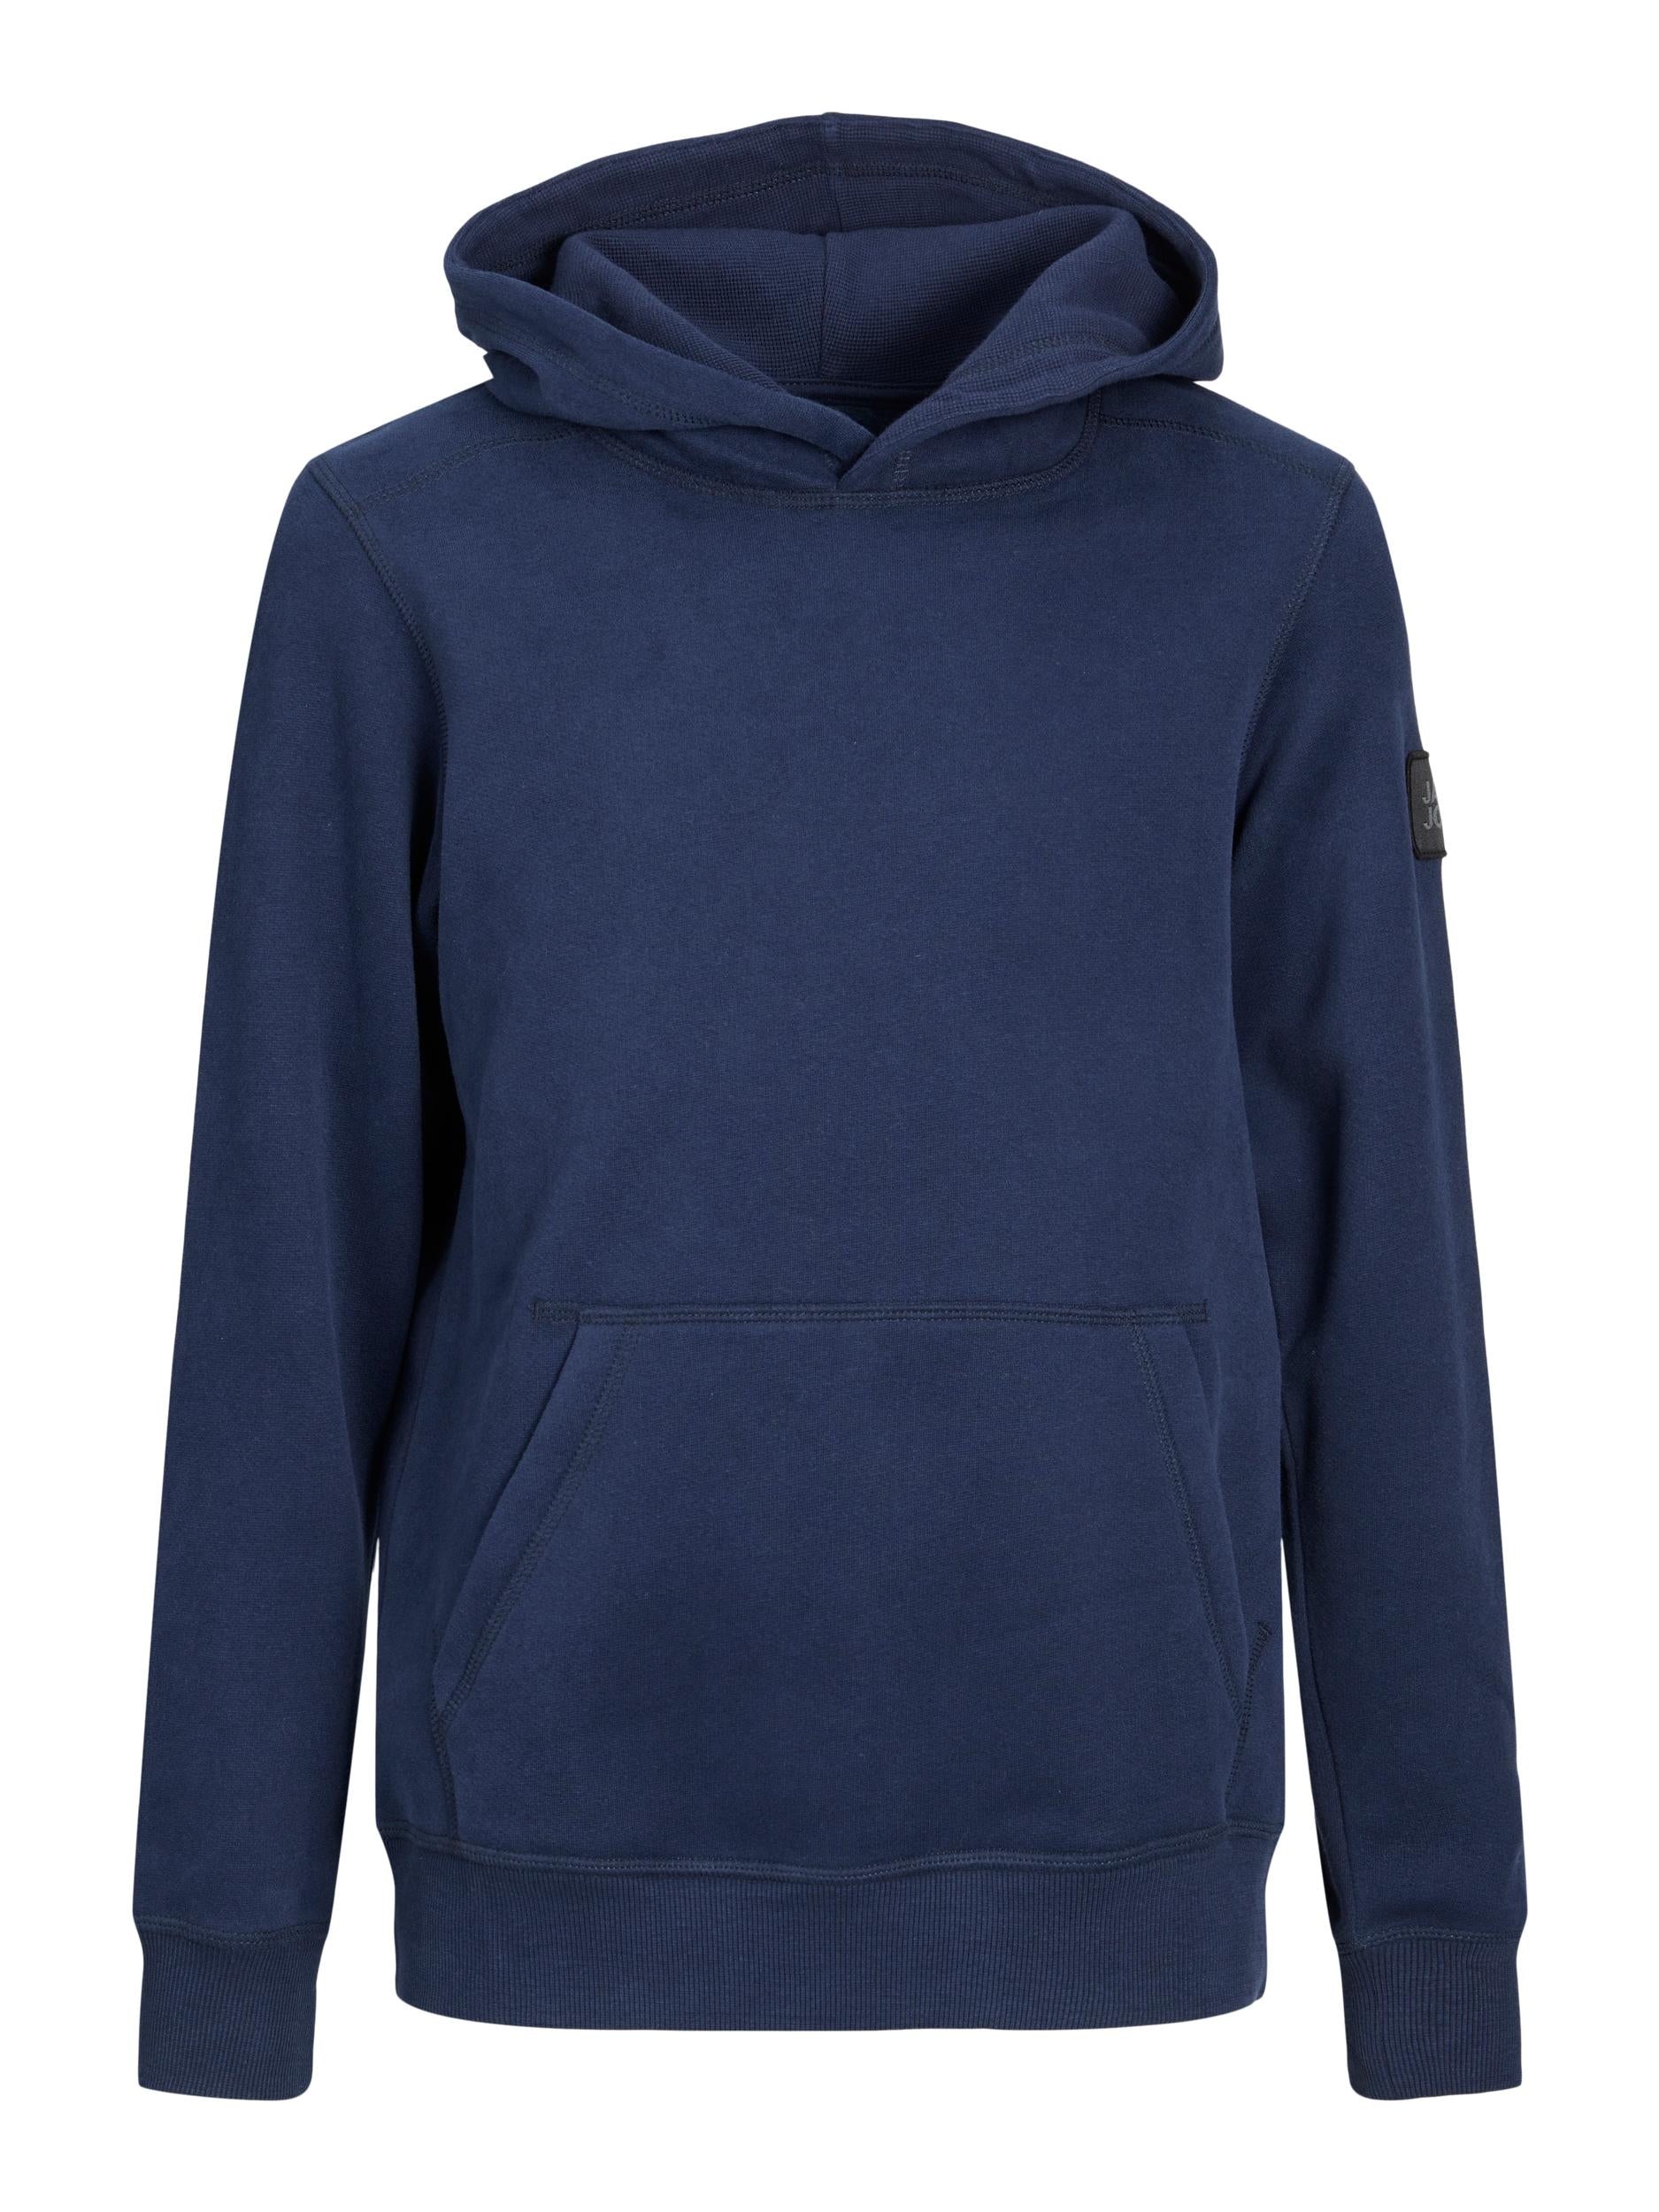 Classic Waffle Sweat Junior Navy Hoodie-Front view